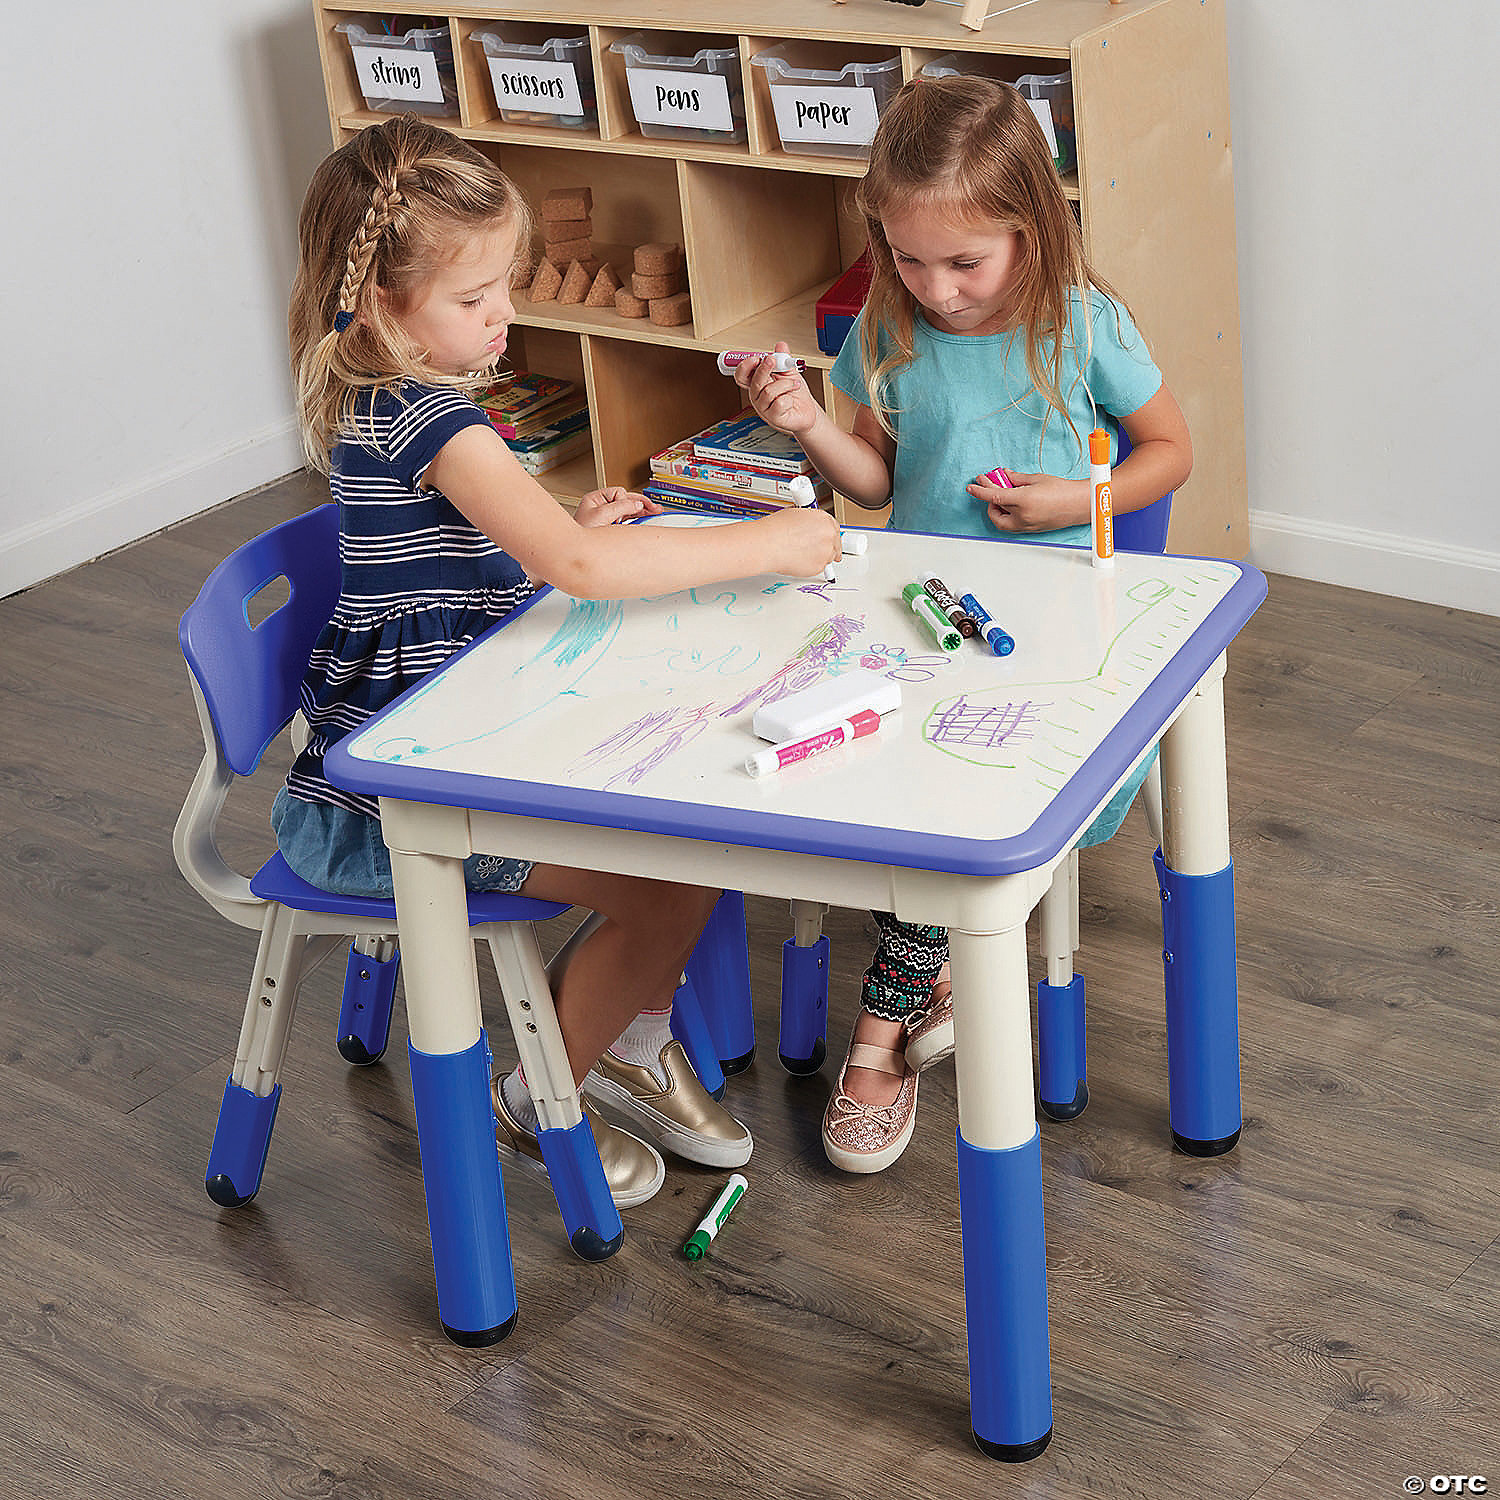 ECR4Kids Square Dry-Erase Activity Table with 2 Chairs Indoor Kids Plastic Adjustable Table and Chair Set for Classrooms 3-Piece Set Grassy Green Daycares Homes